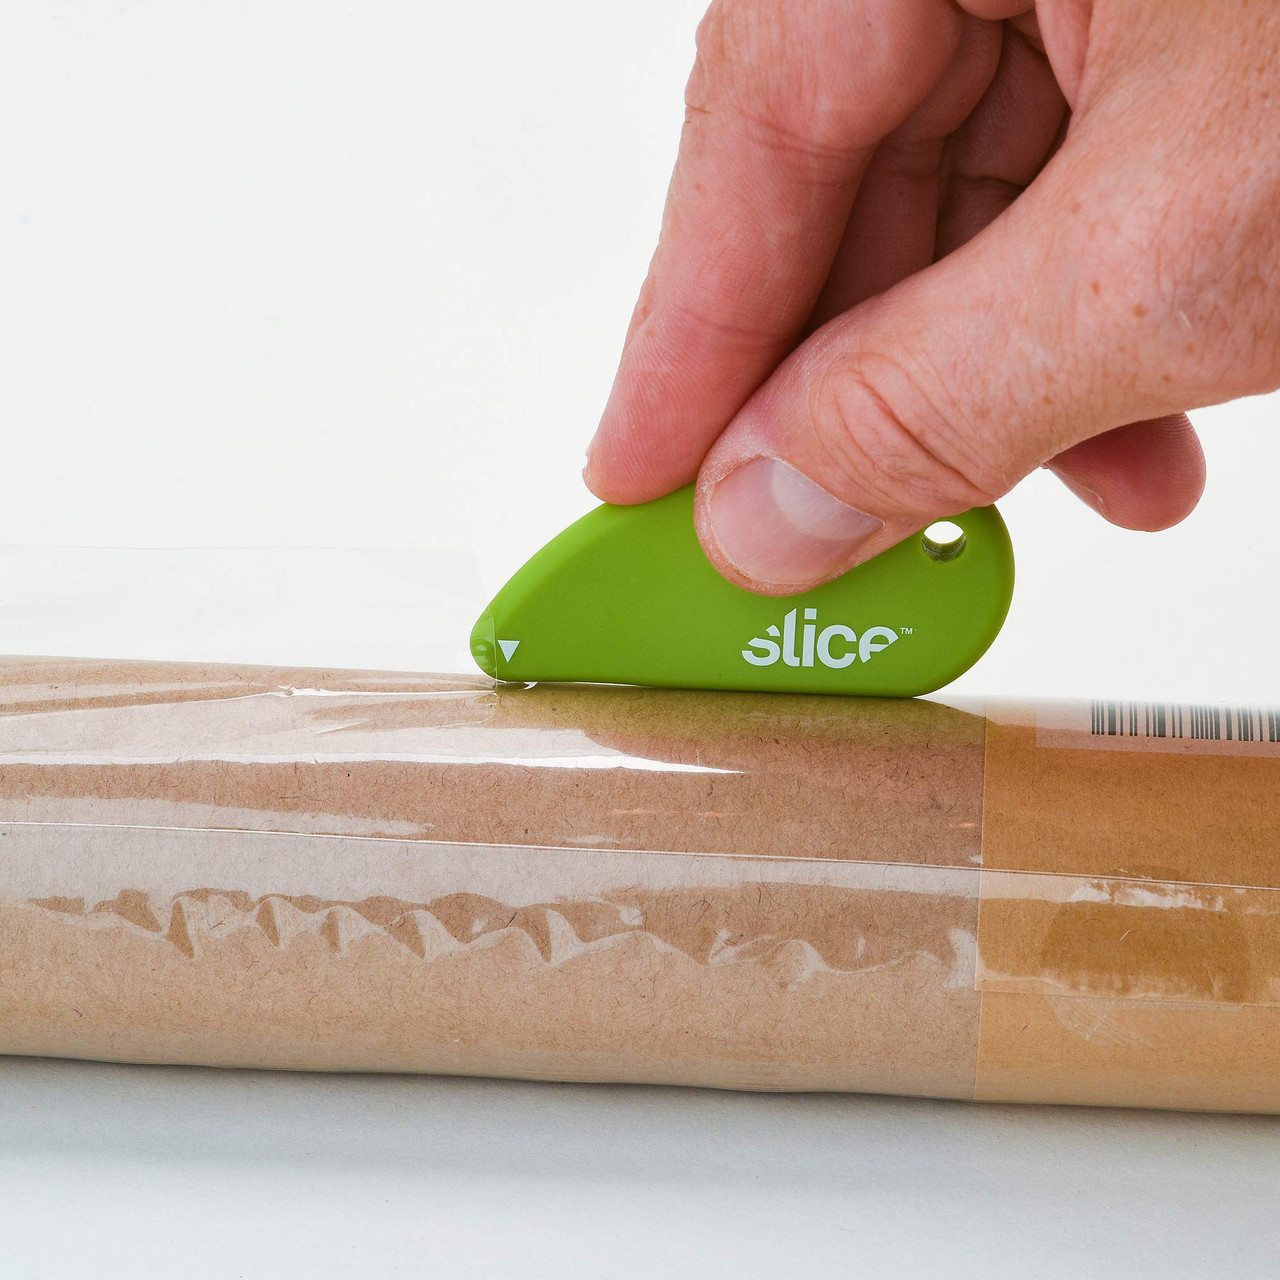 Slice Ceramic Blade, Safety Cutter Finger Friendly, Cuts Blister